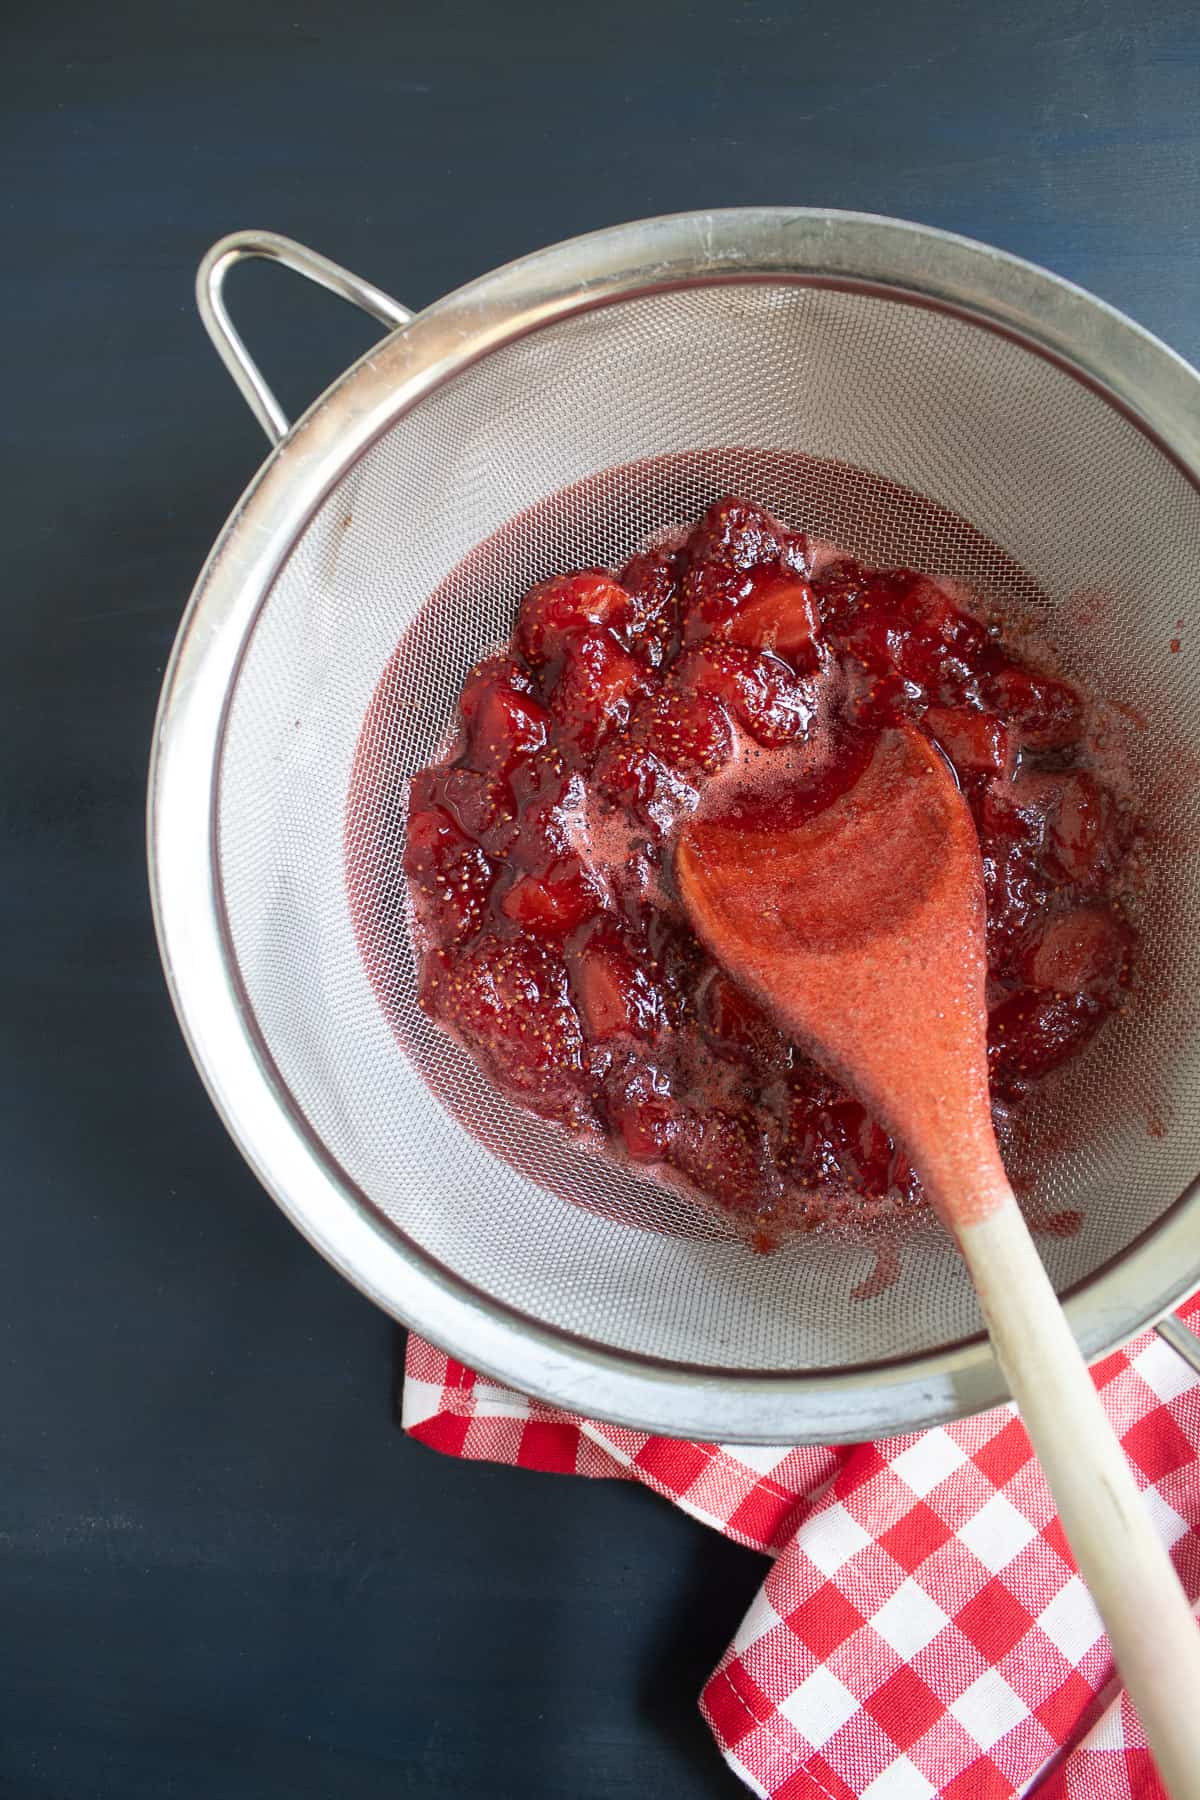 Strawberries are strained out of the syrup with a mesh colander.